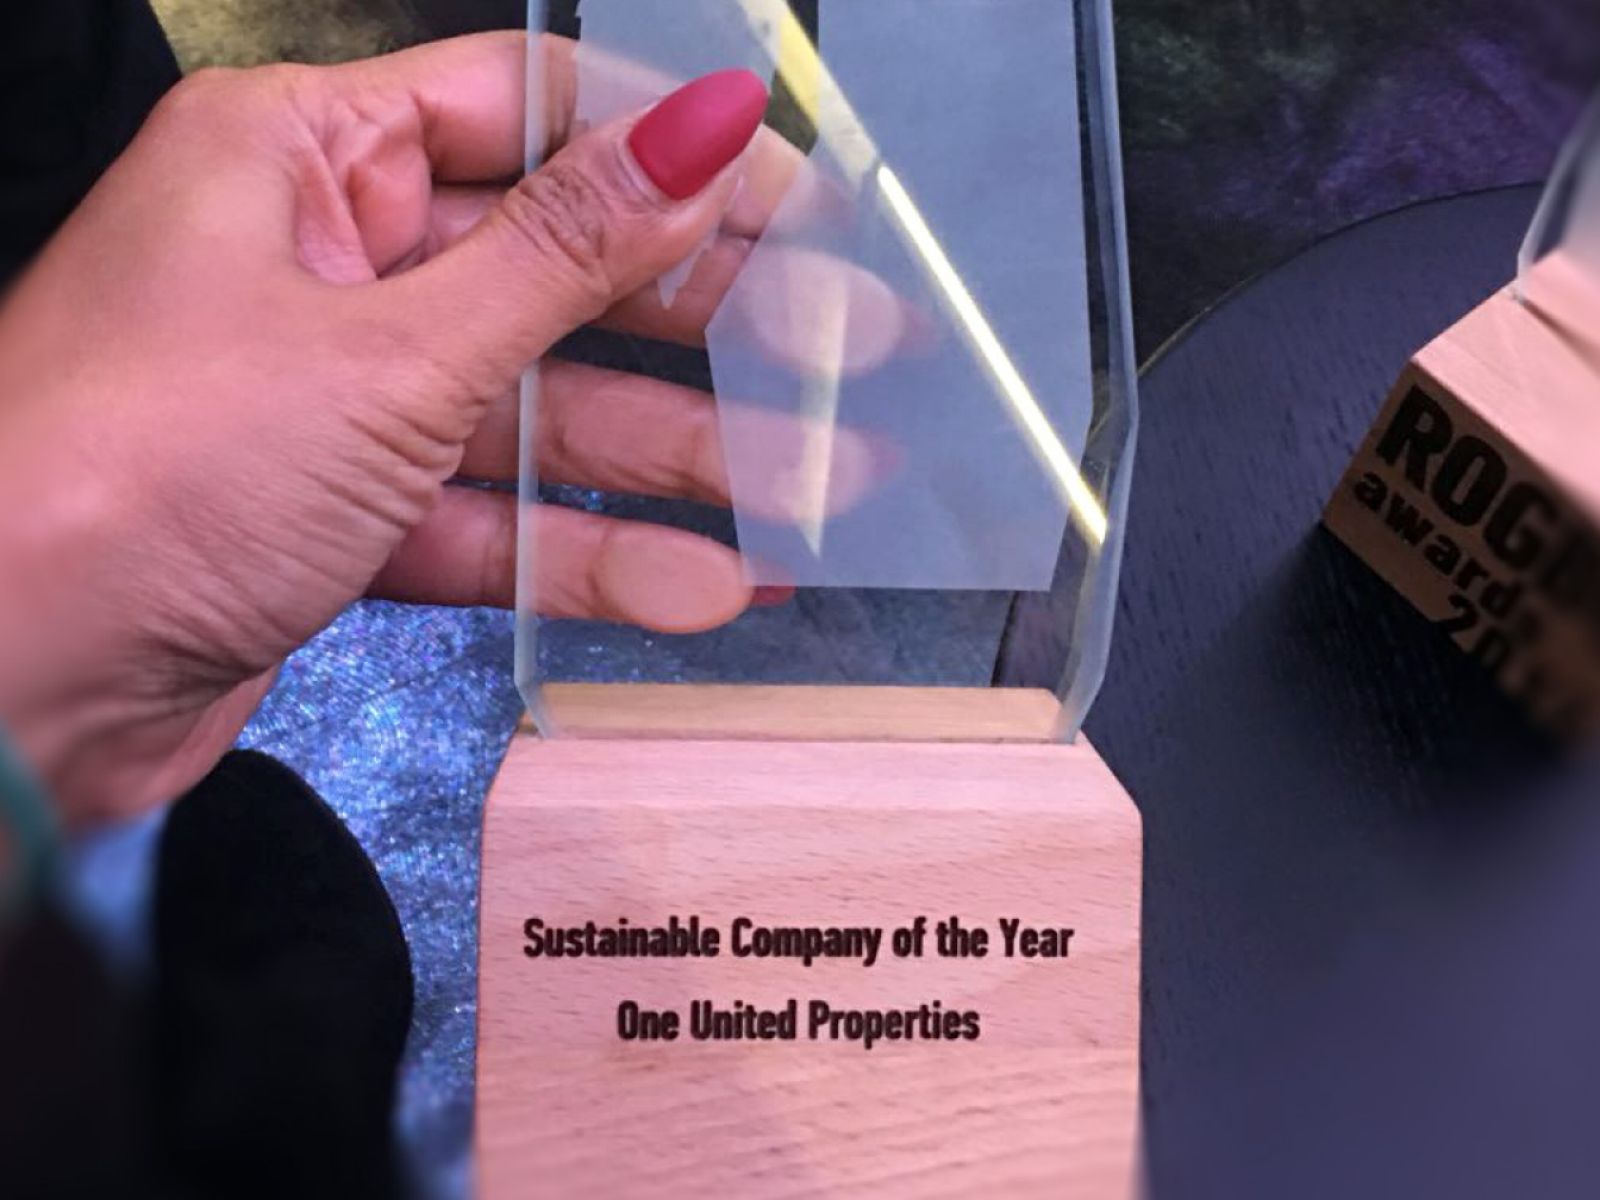 One United Properties awarded by RoGBC – Green Awards: ”Sustainable Company of the Year 2017”